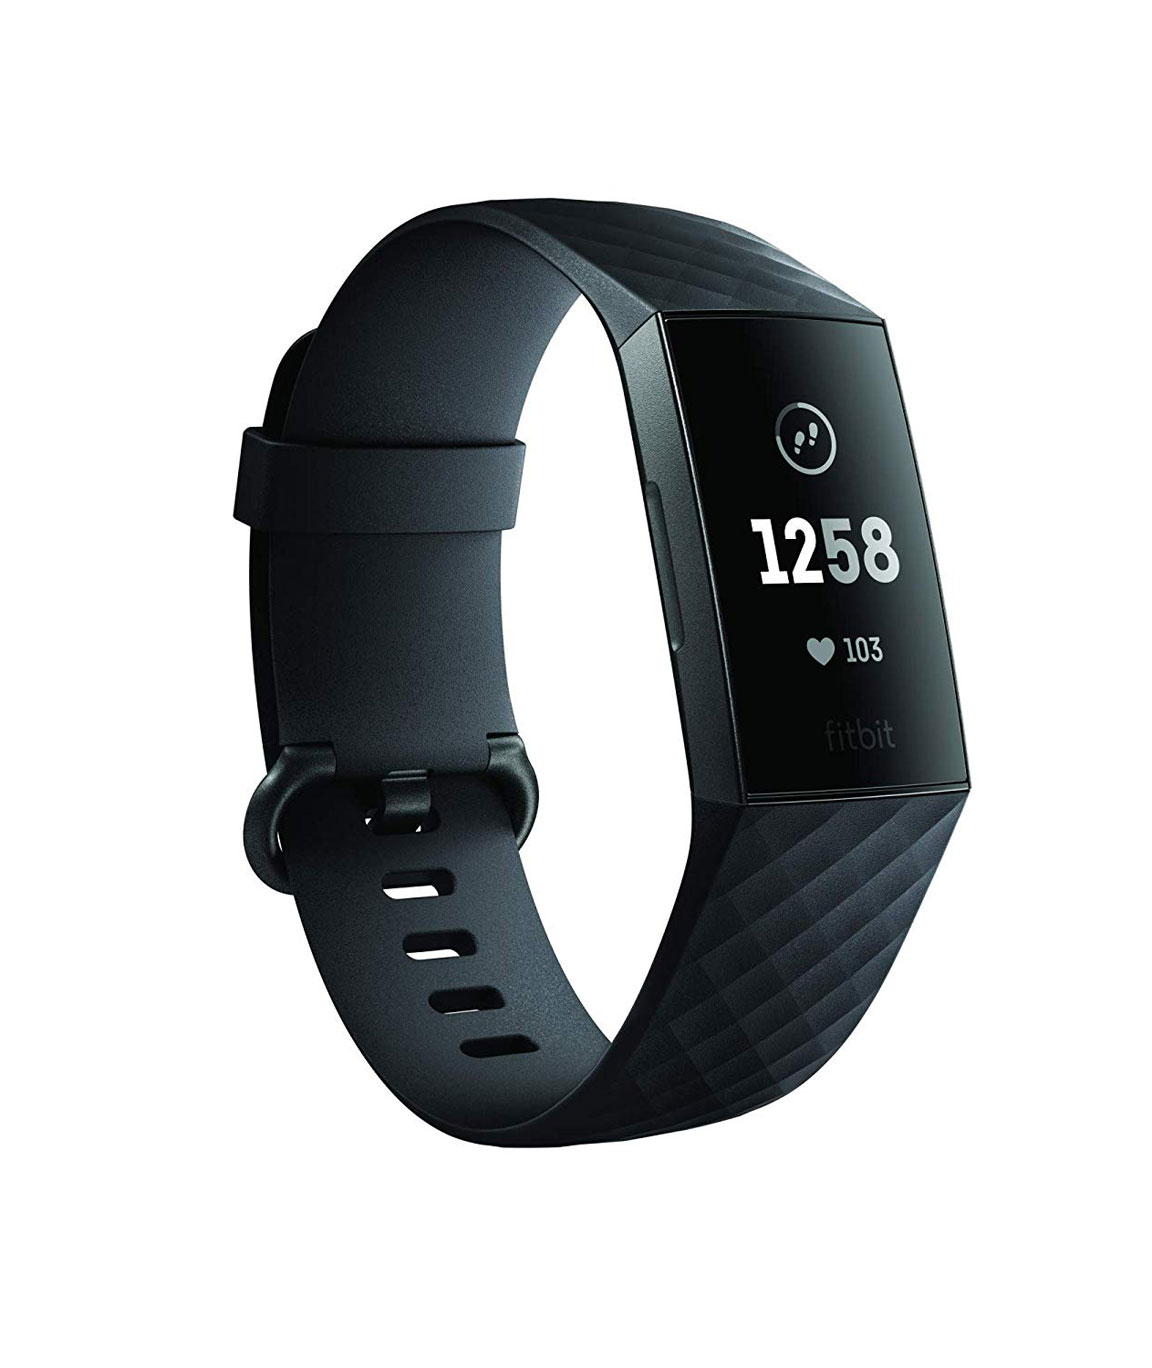 Fitbit Charge 3 Fitness Activity Tracker (Graphite and Black) with Offer on Accessory